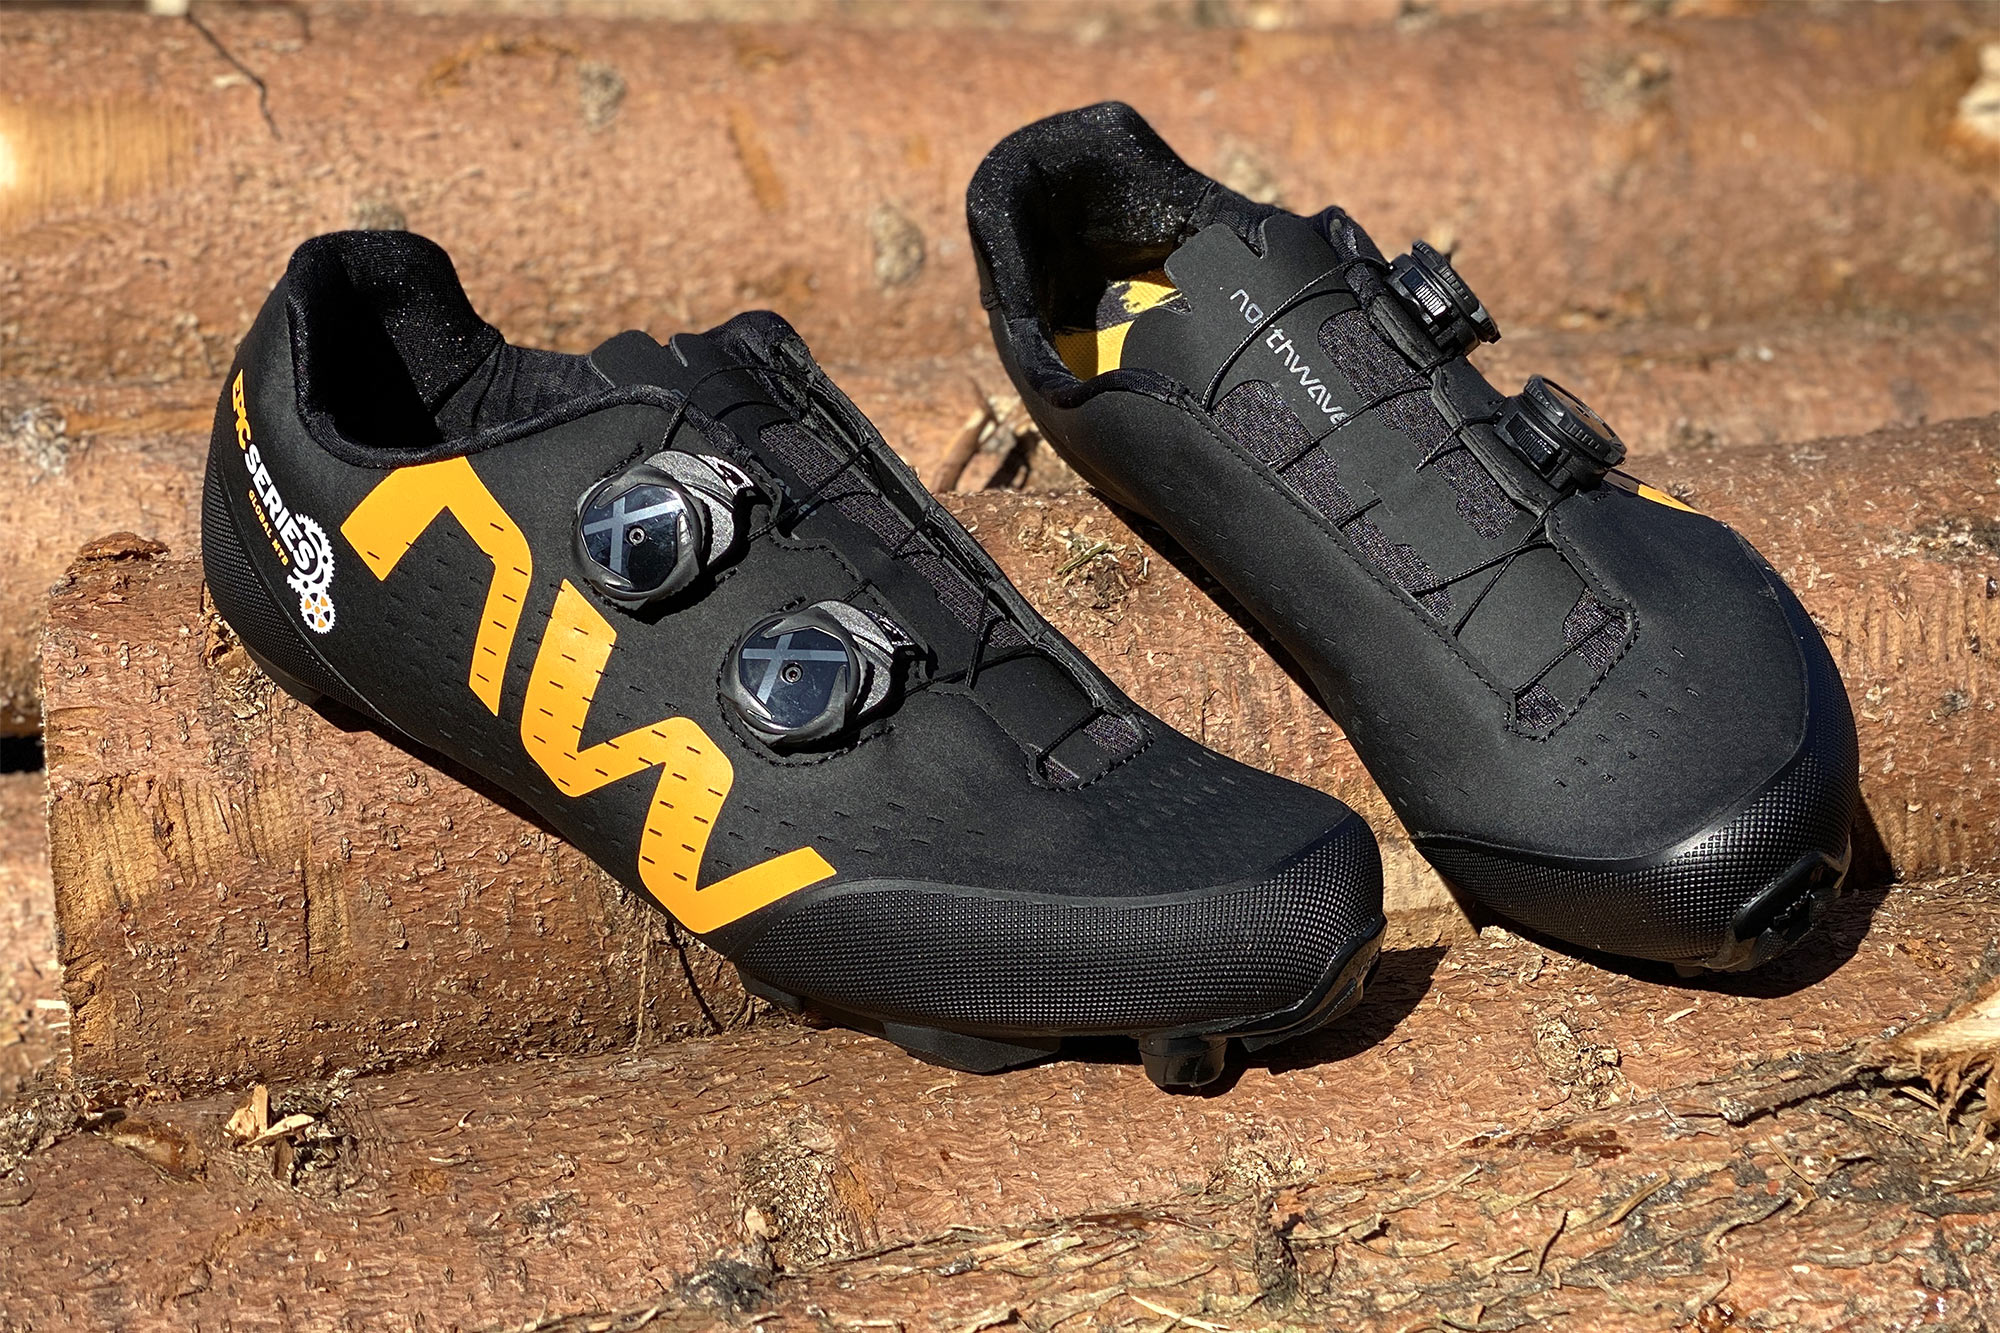 Northwave & Cape Epic pair up for Special Edition Rebel 3 x Epic